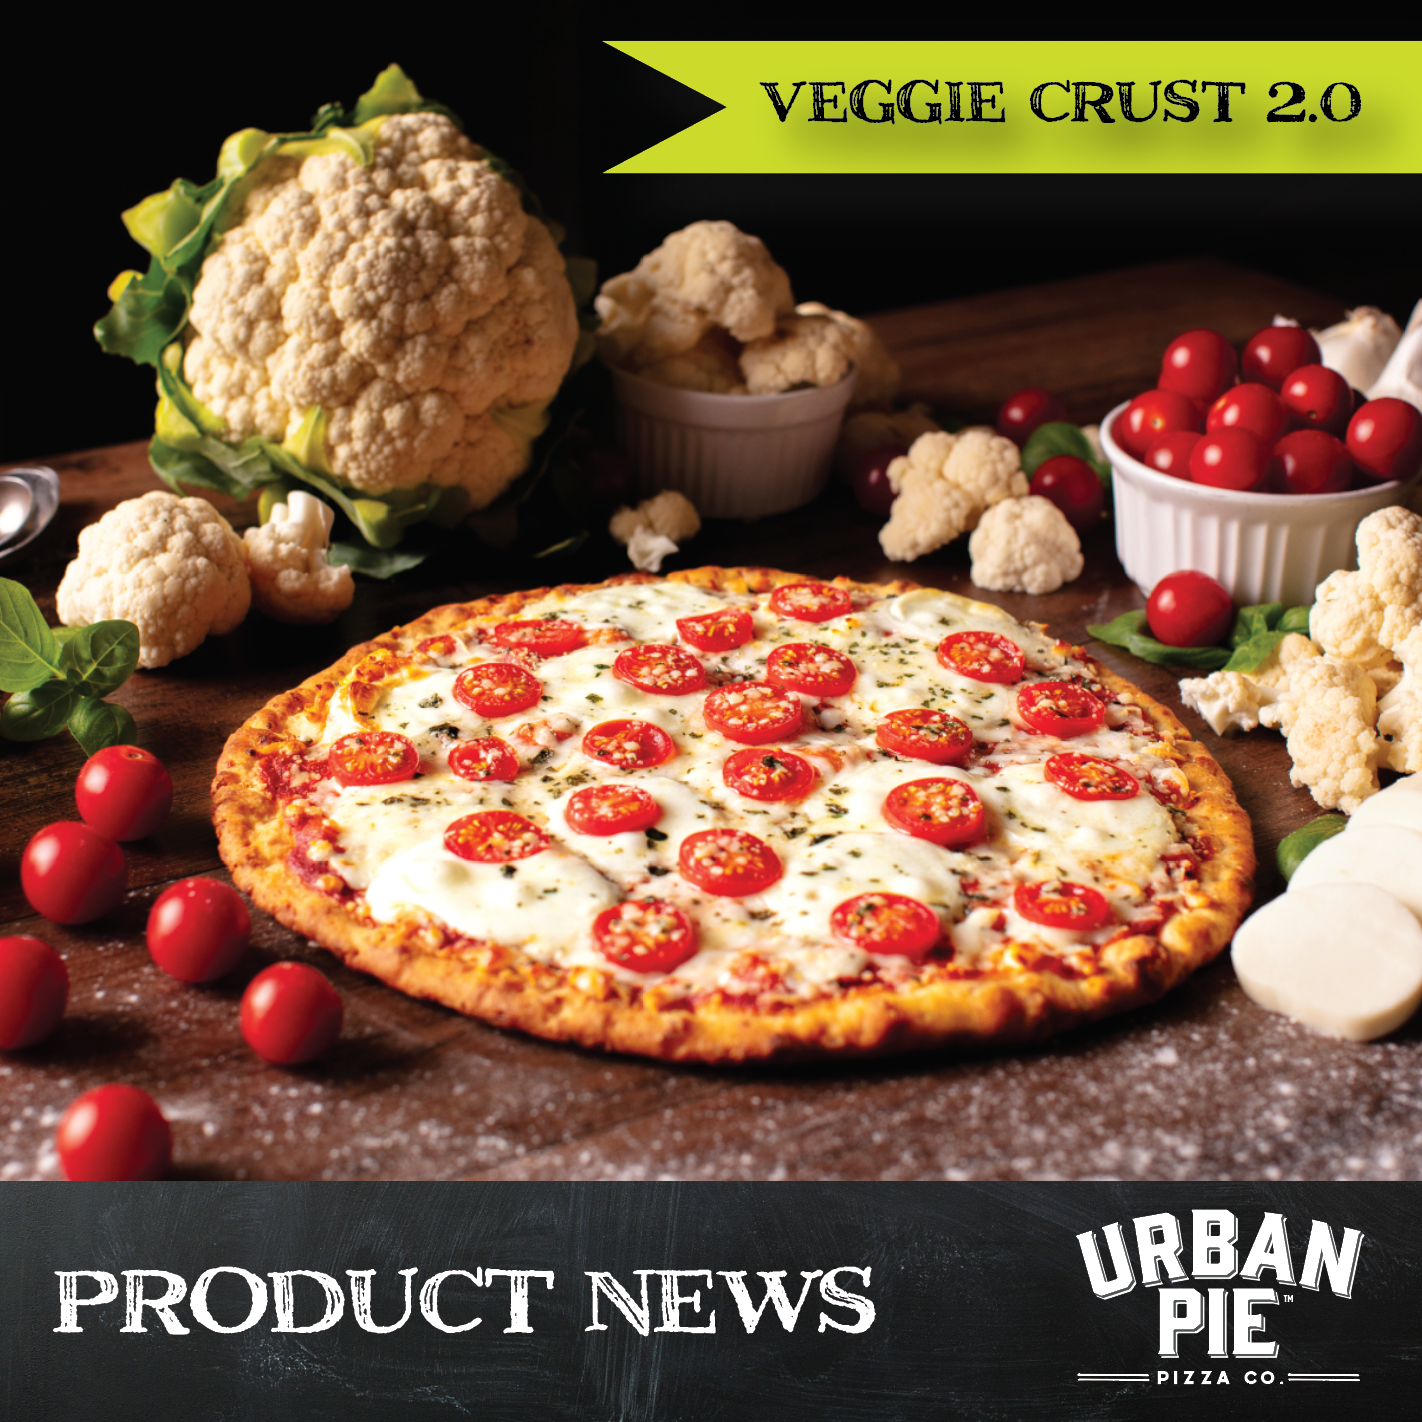 The Next Big Thing in Veggie Crust Pizza Has Arrived